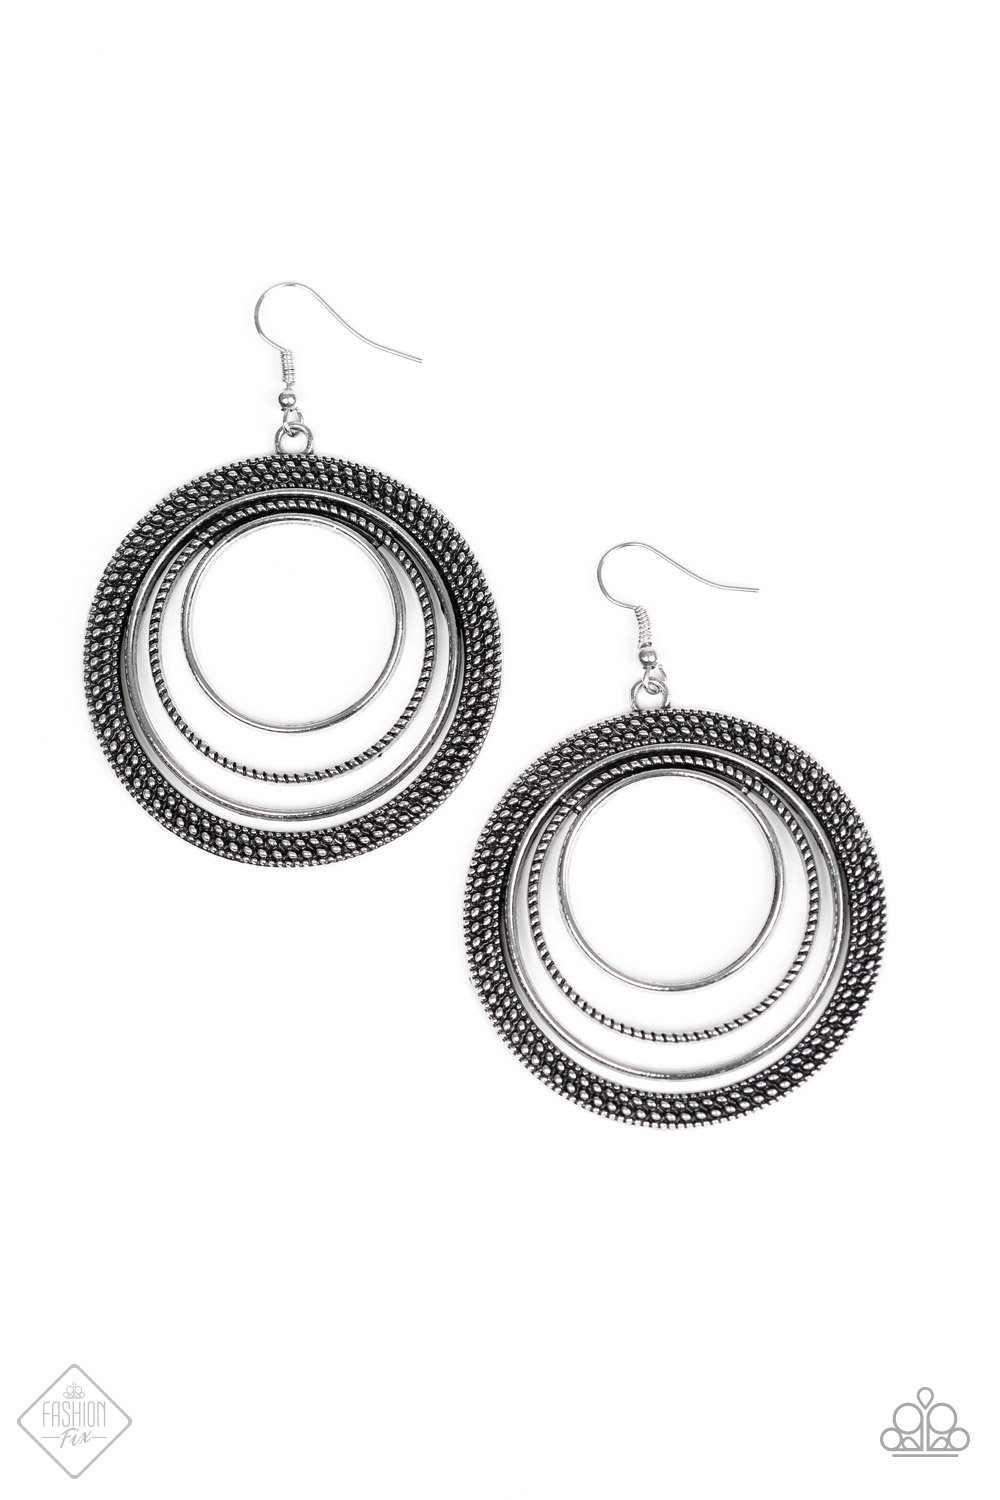 Totally Textured Paparazzi Accessories Earrings